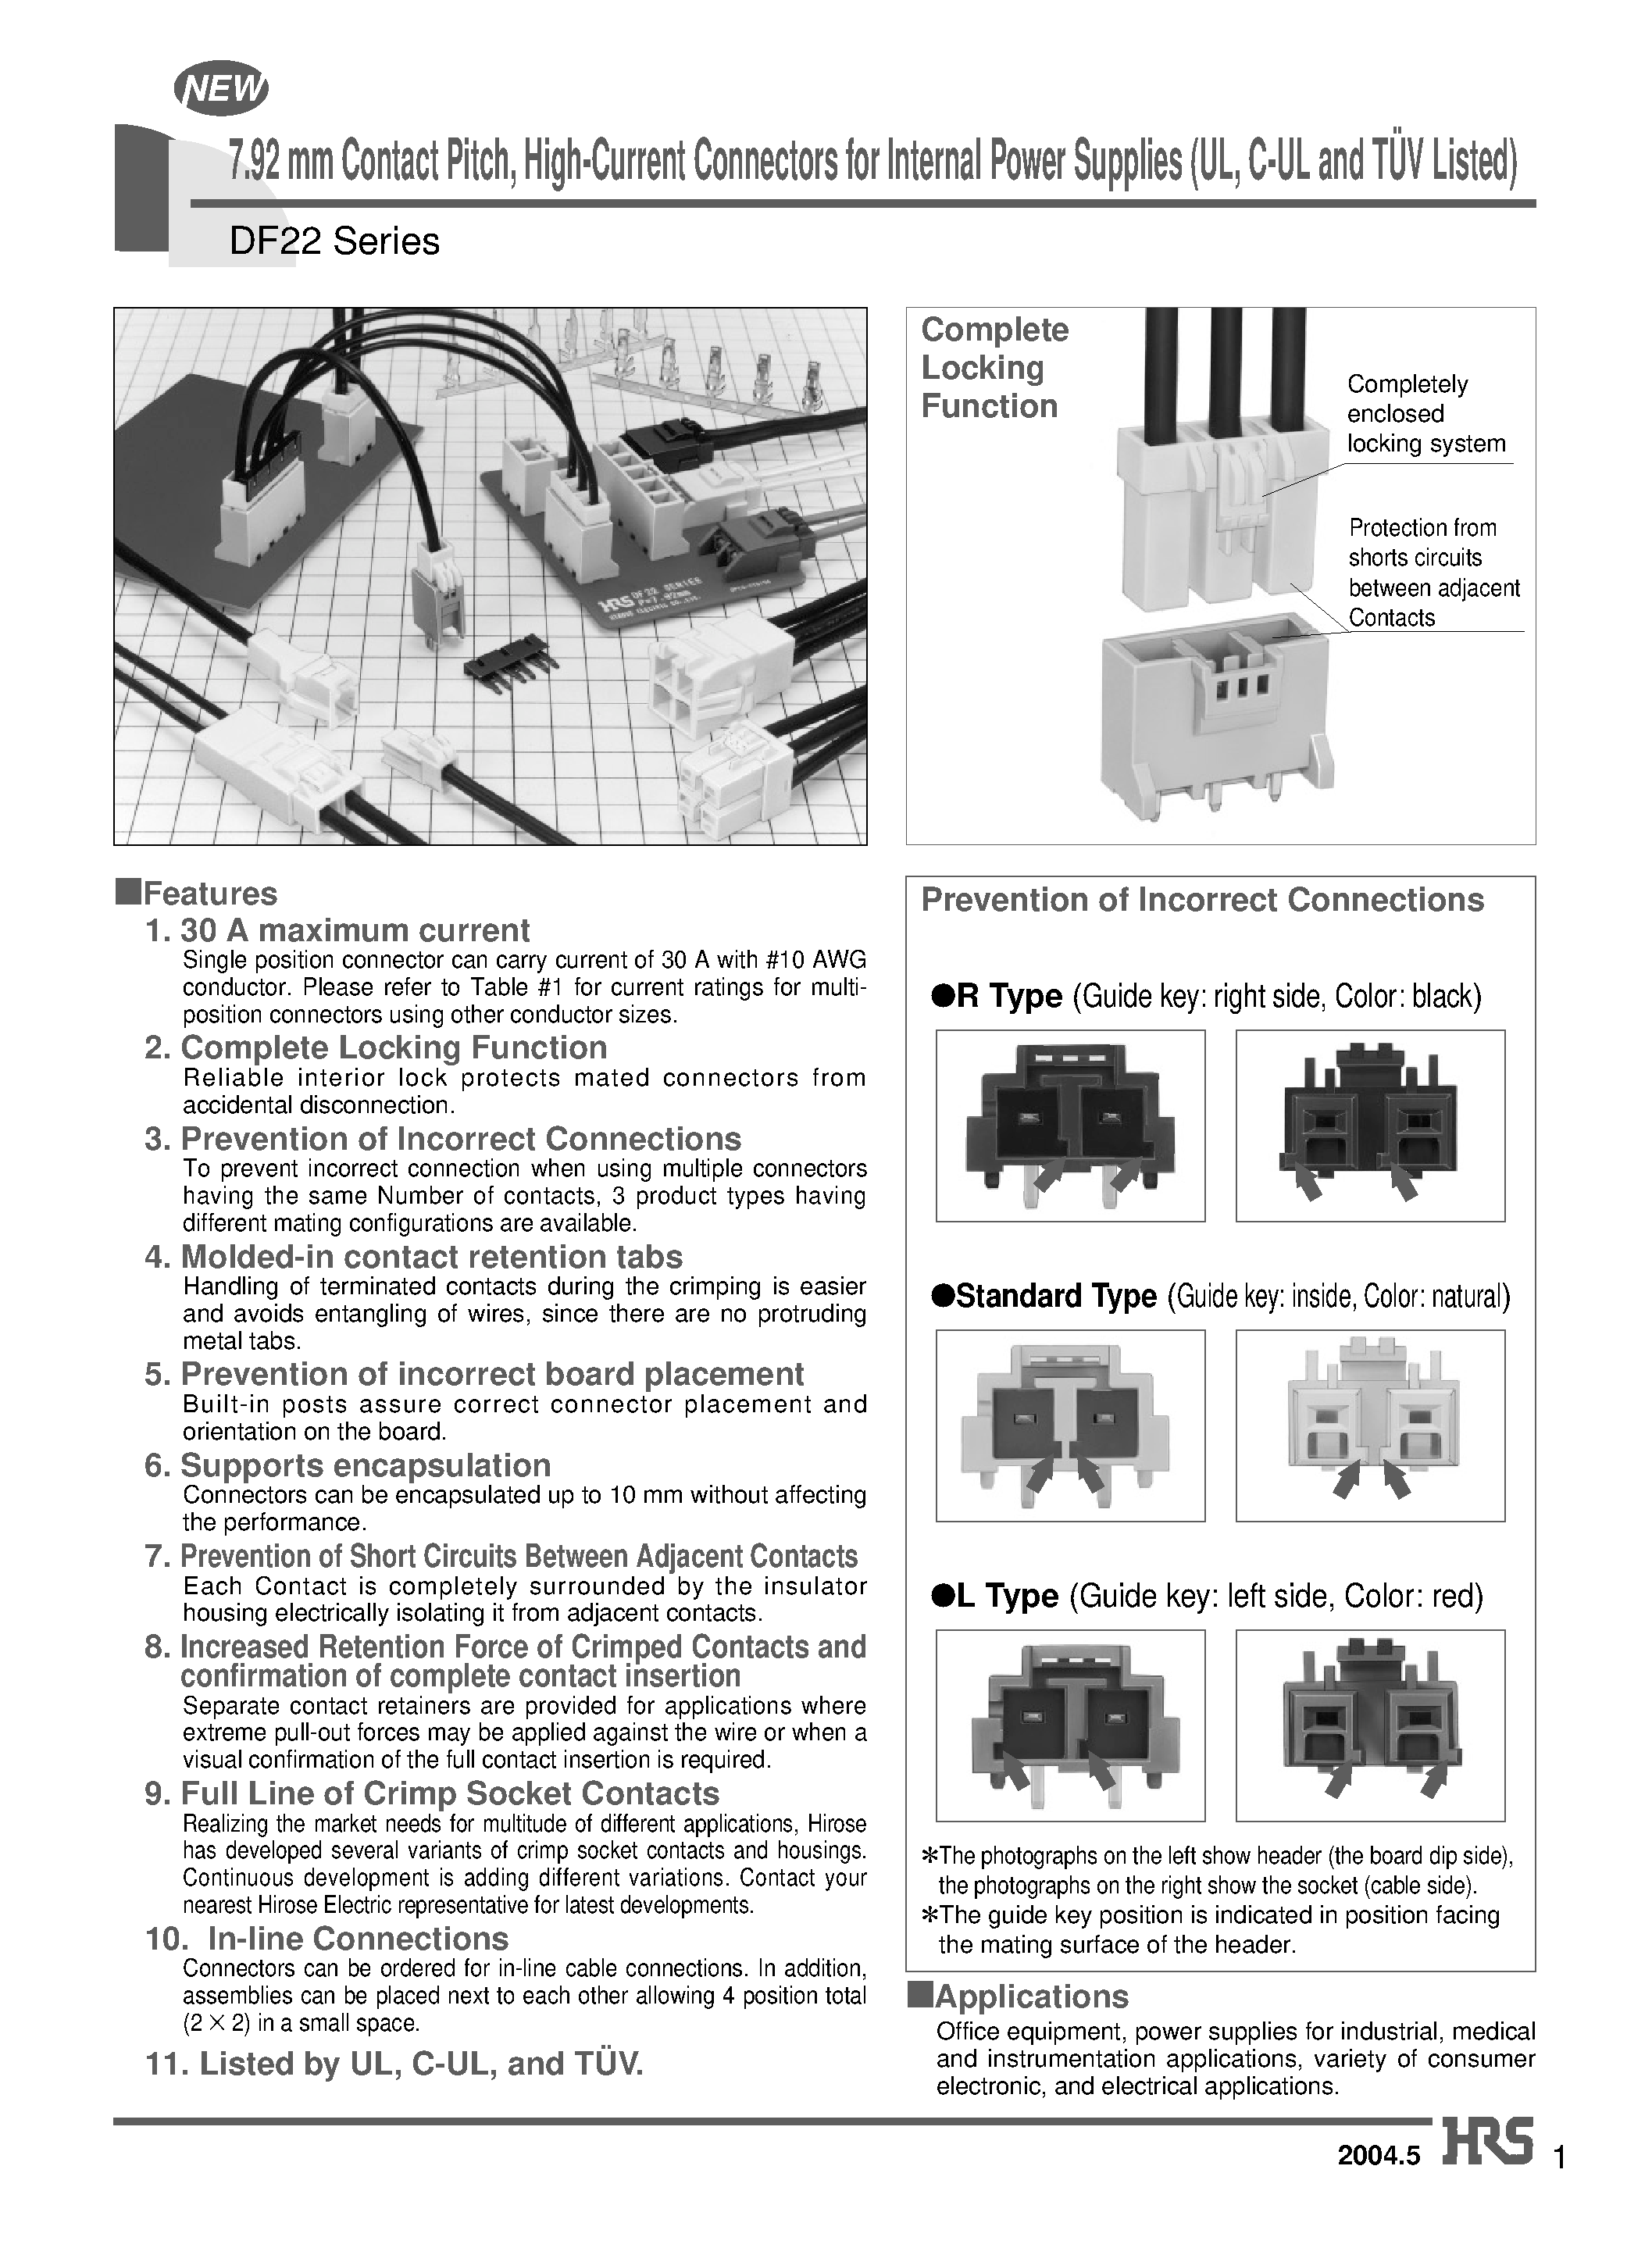 Даташит DF22A-4S-7.92DSA - 7.92 mm Contact Pitch/ High-Current Connectors for Internal Power Supplies (UL/ C-UL and TUV Listed) страница 1